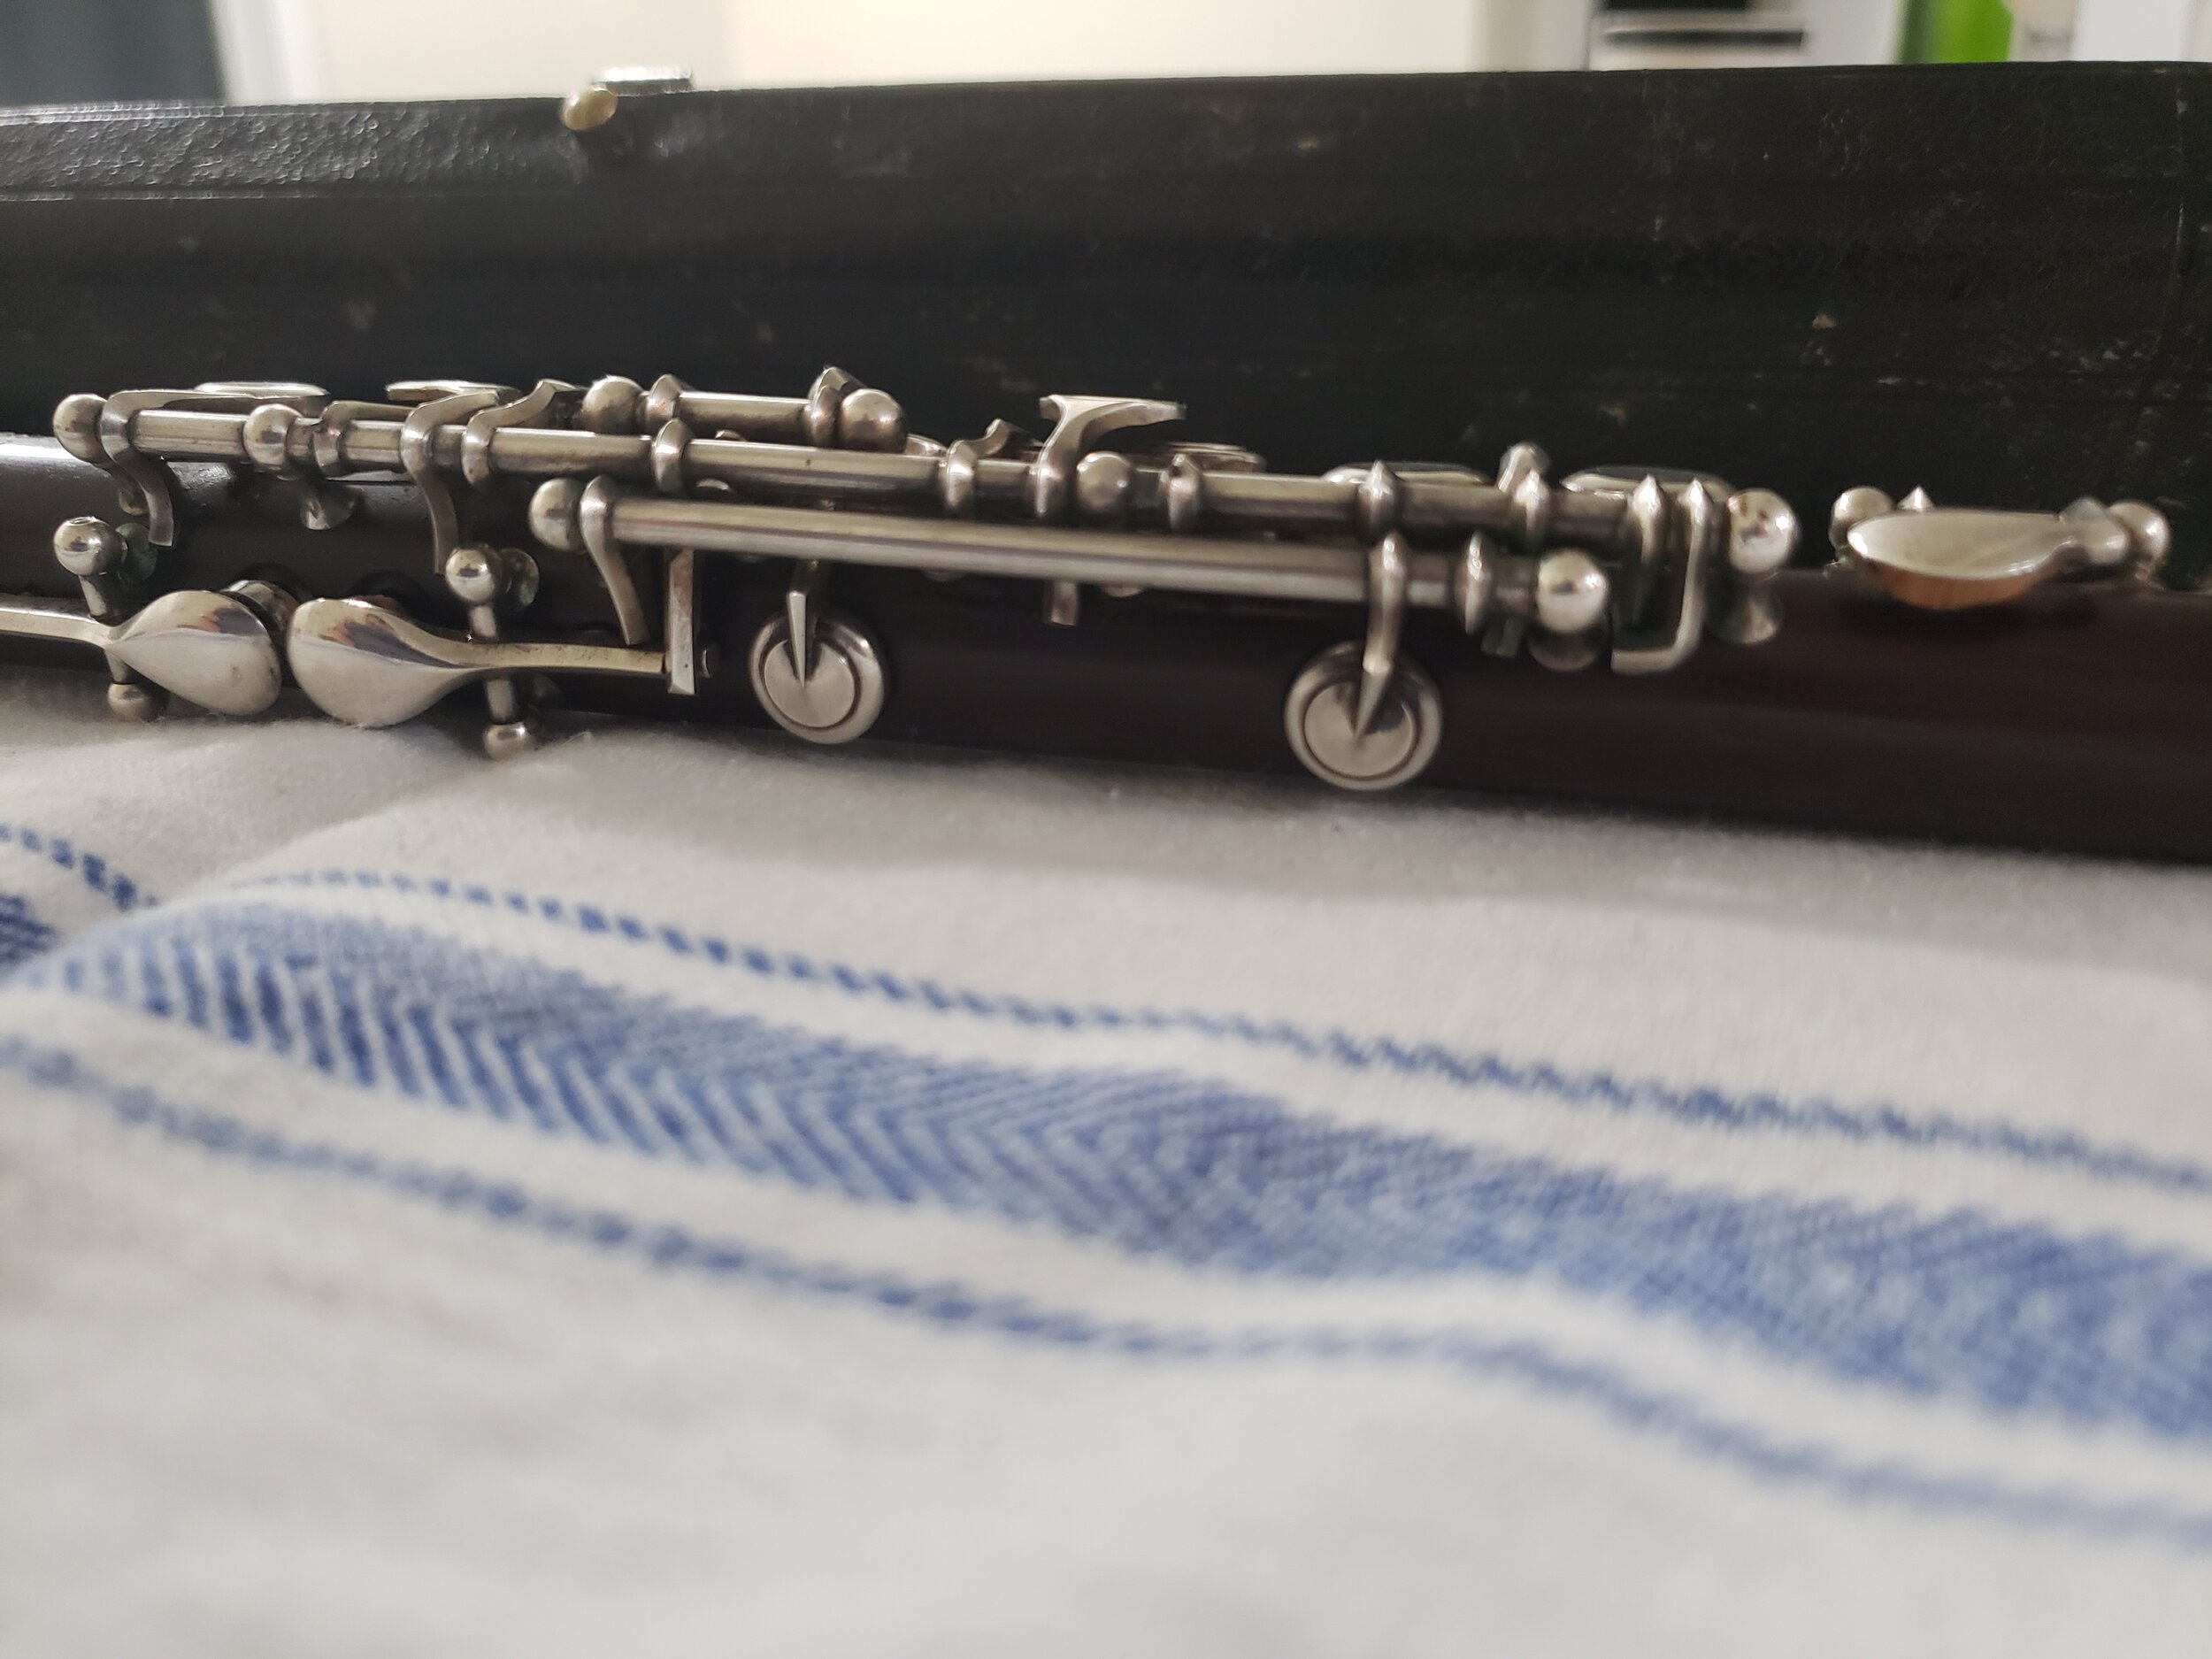  Rudall Carte “Guard’s Model” Piccolo in cocuswood with silver keys. 